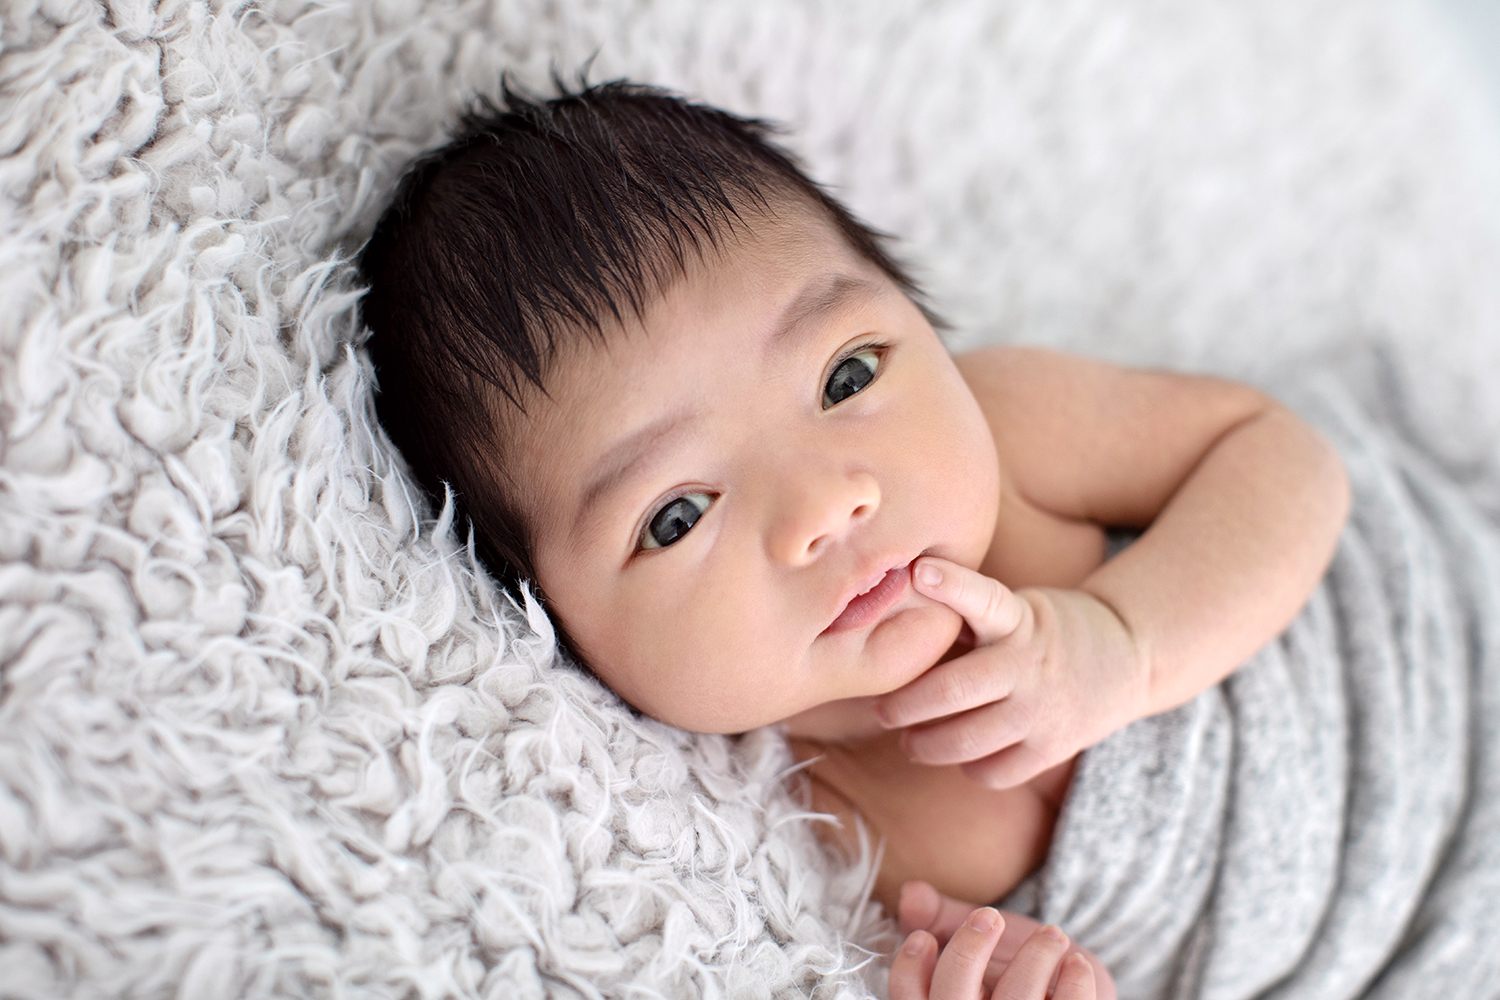 Newborn baby's serene expression during a photoshoot